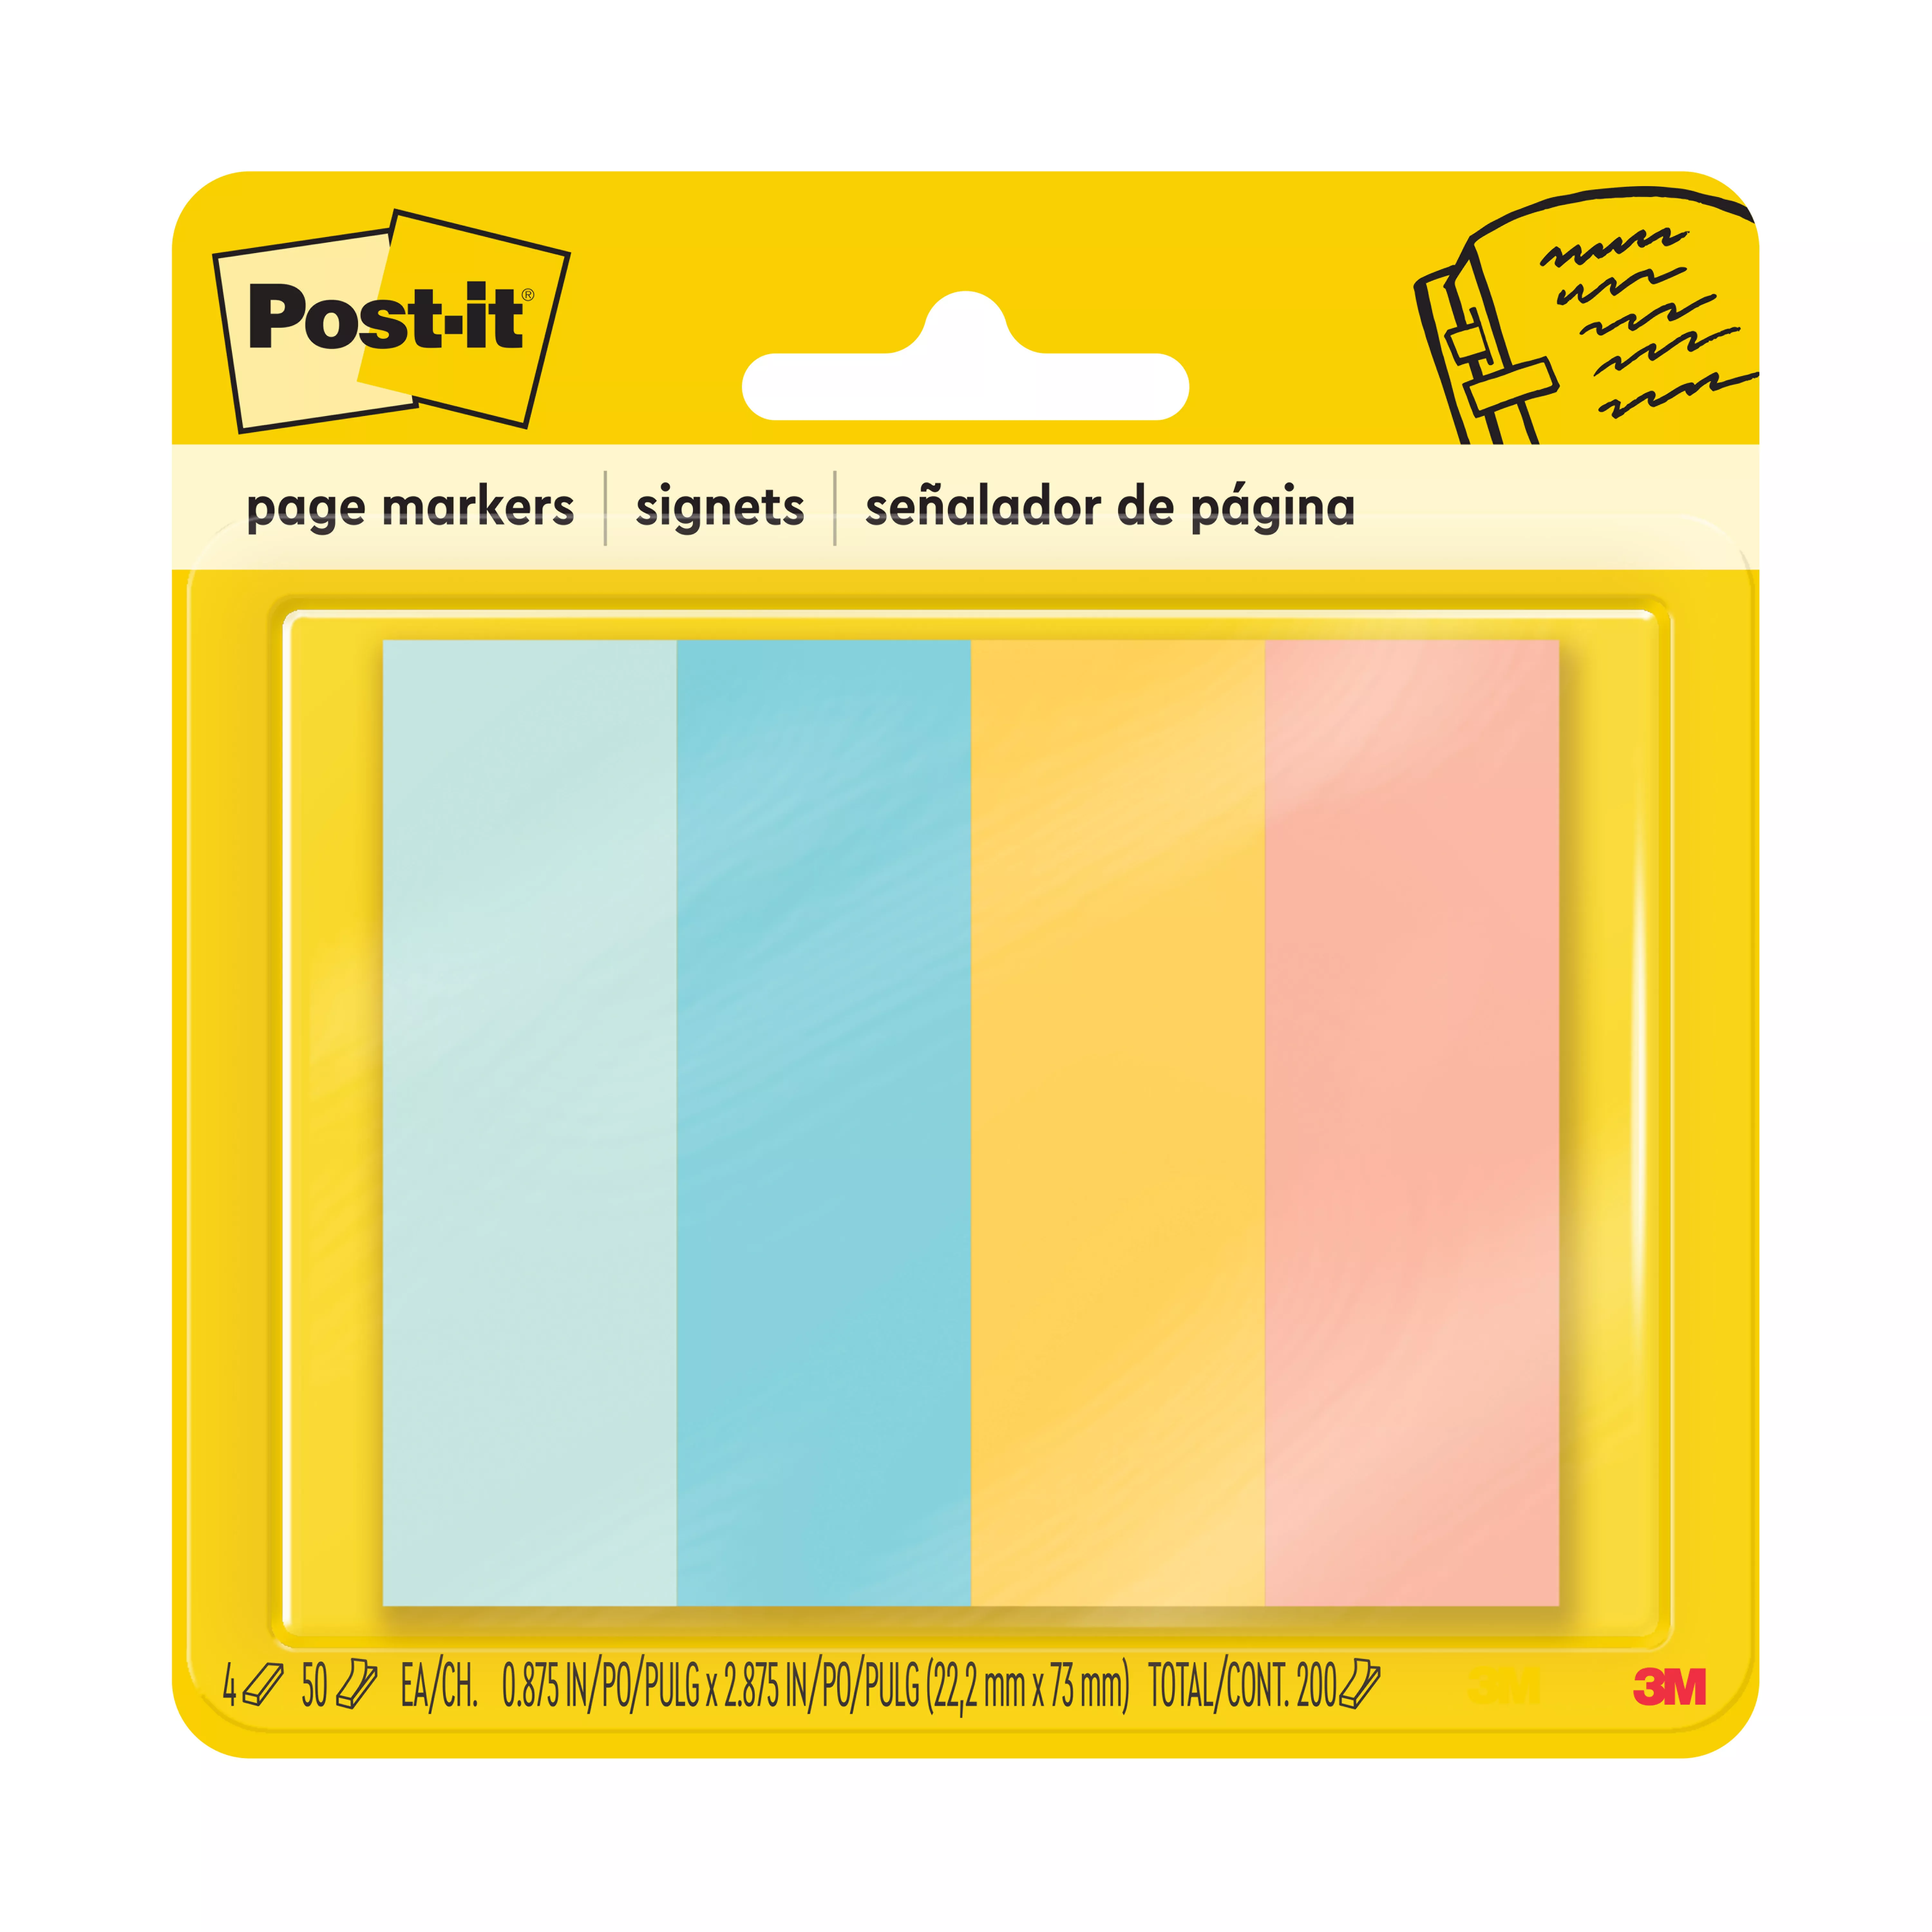 Post-it® Page Marker 671-4AF, 7/8 in x 2 7/8 in x (22,2 mm x 73 mm)
Assorted Colors